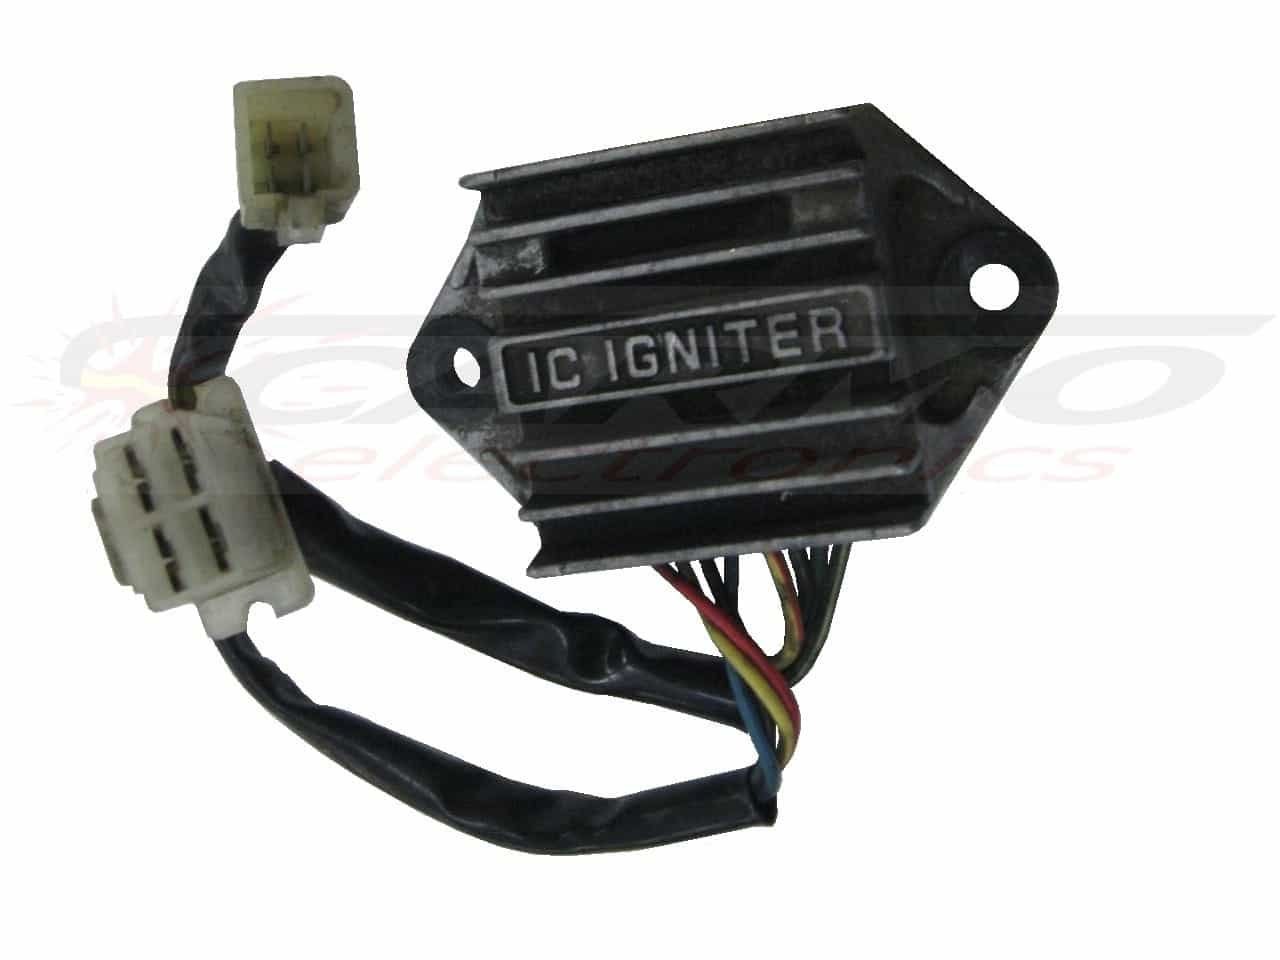 Z550A2 CDI ignitor ignition unit IC igniter